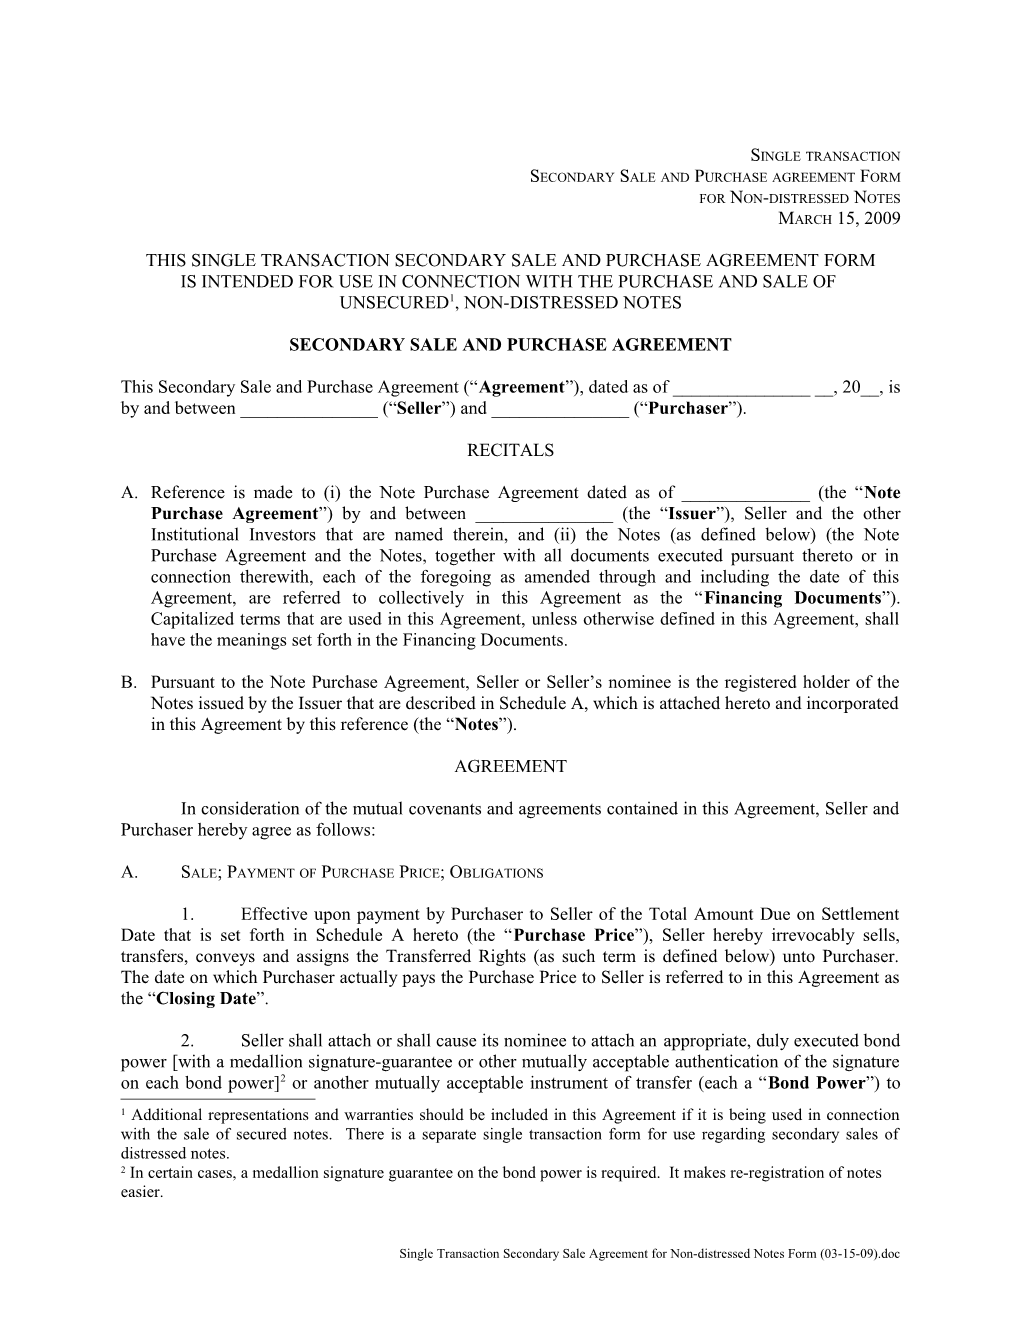 Secondary Sale and Purchase Agreement Form